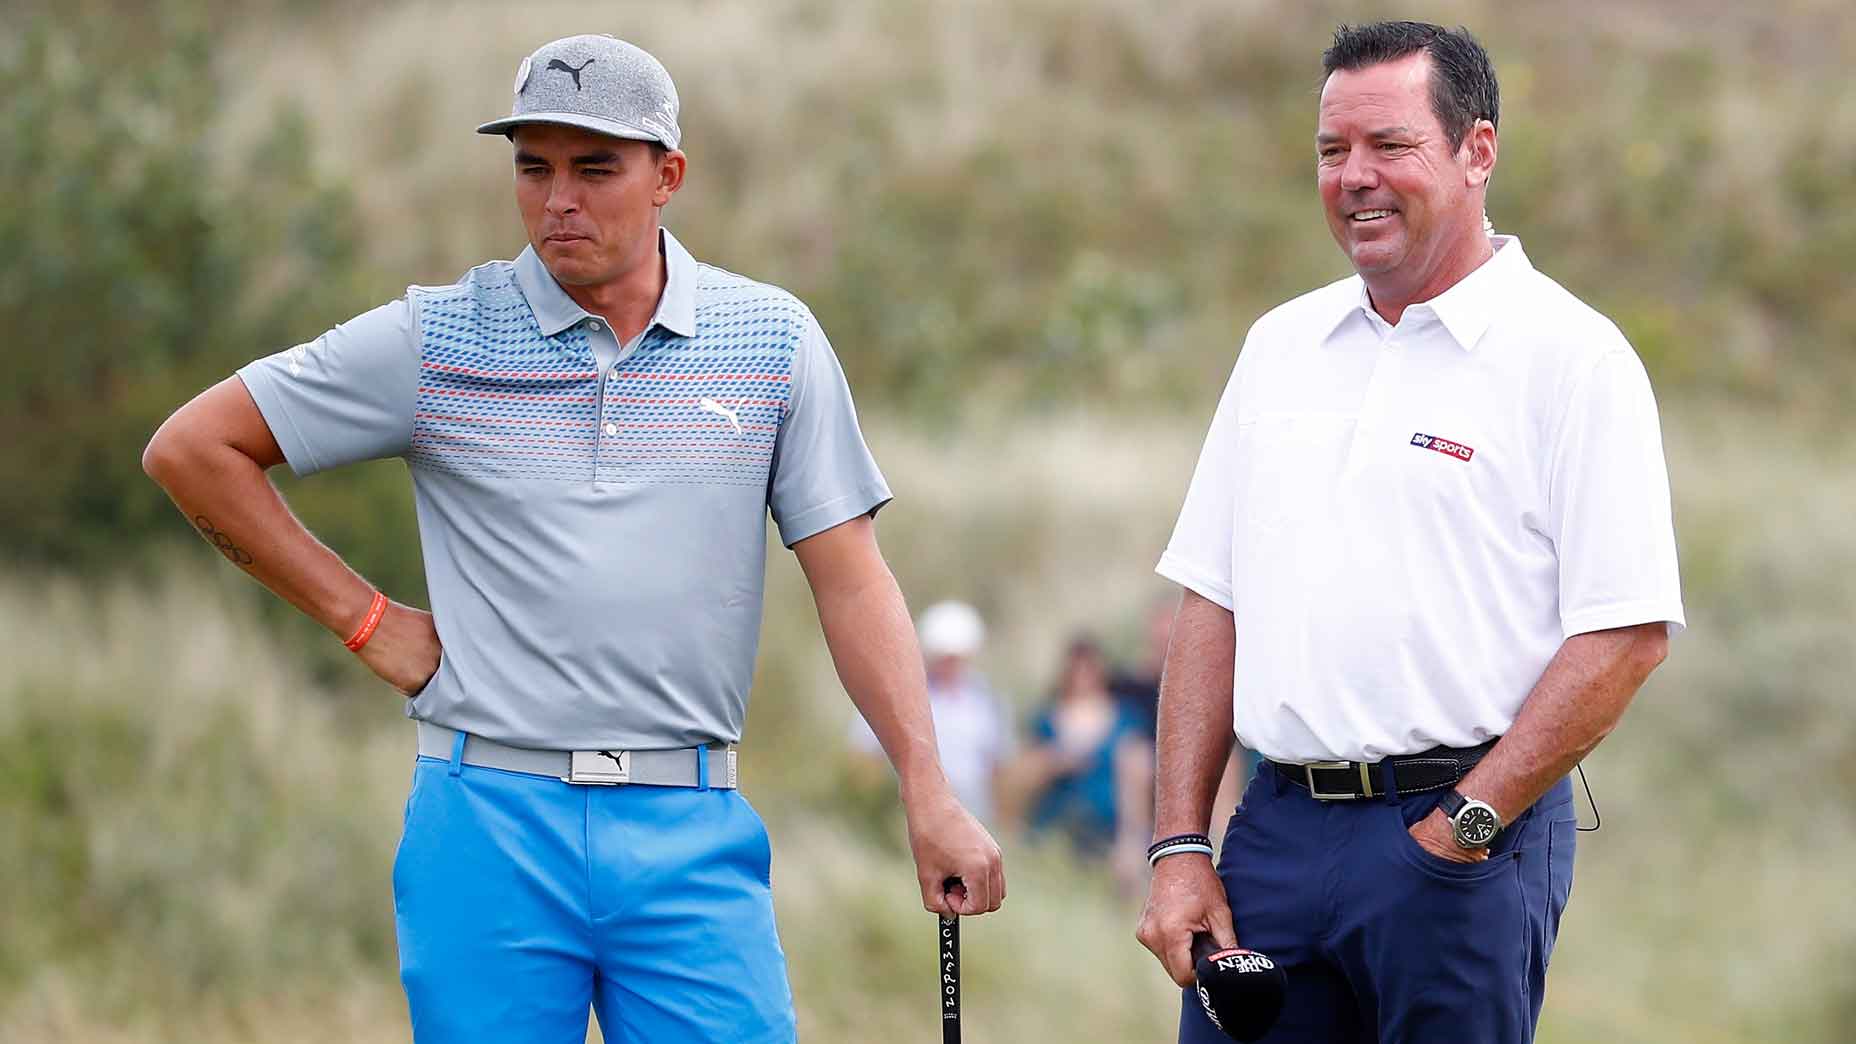 Why Rich Beem disagrees with Brandel Chamblee on getting to know players